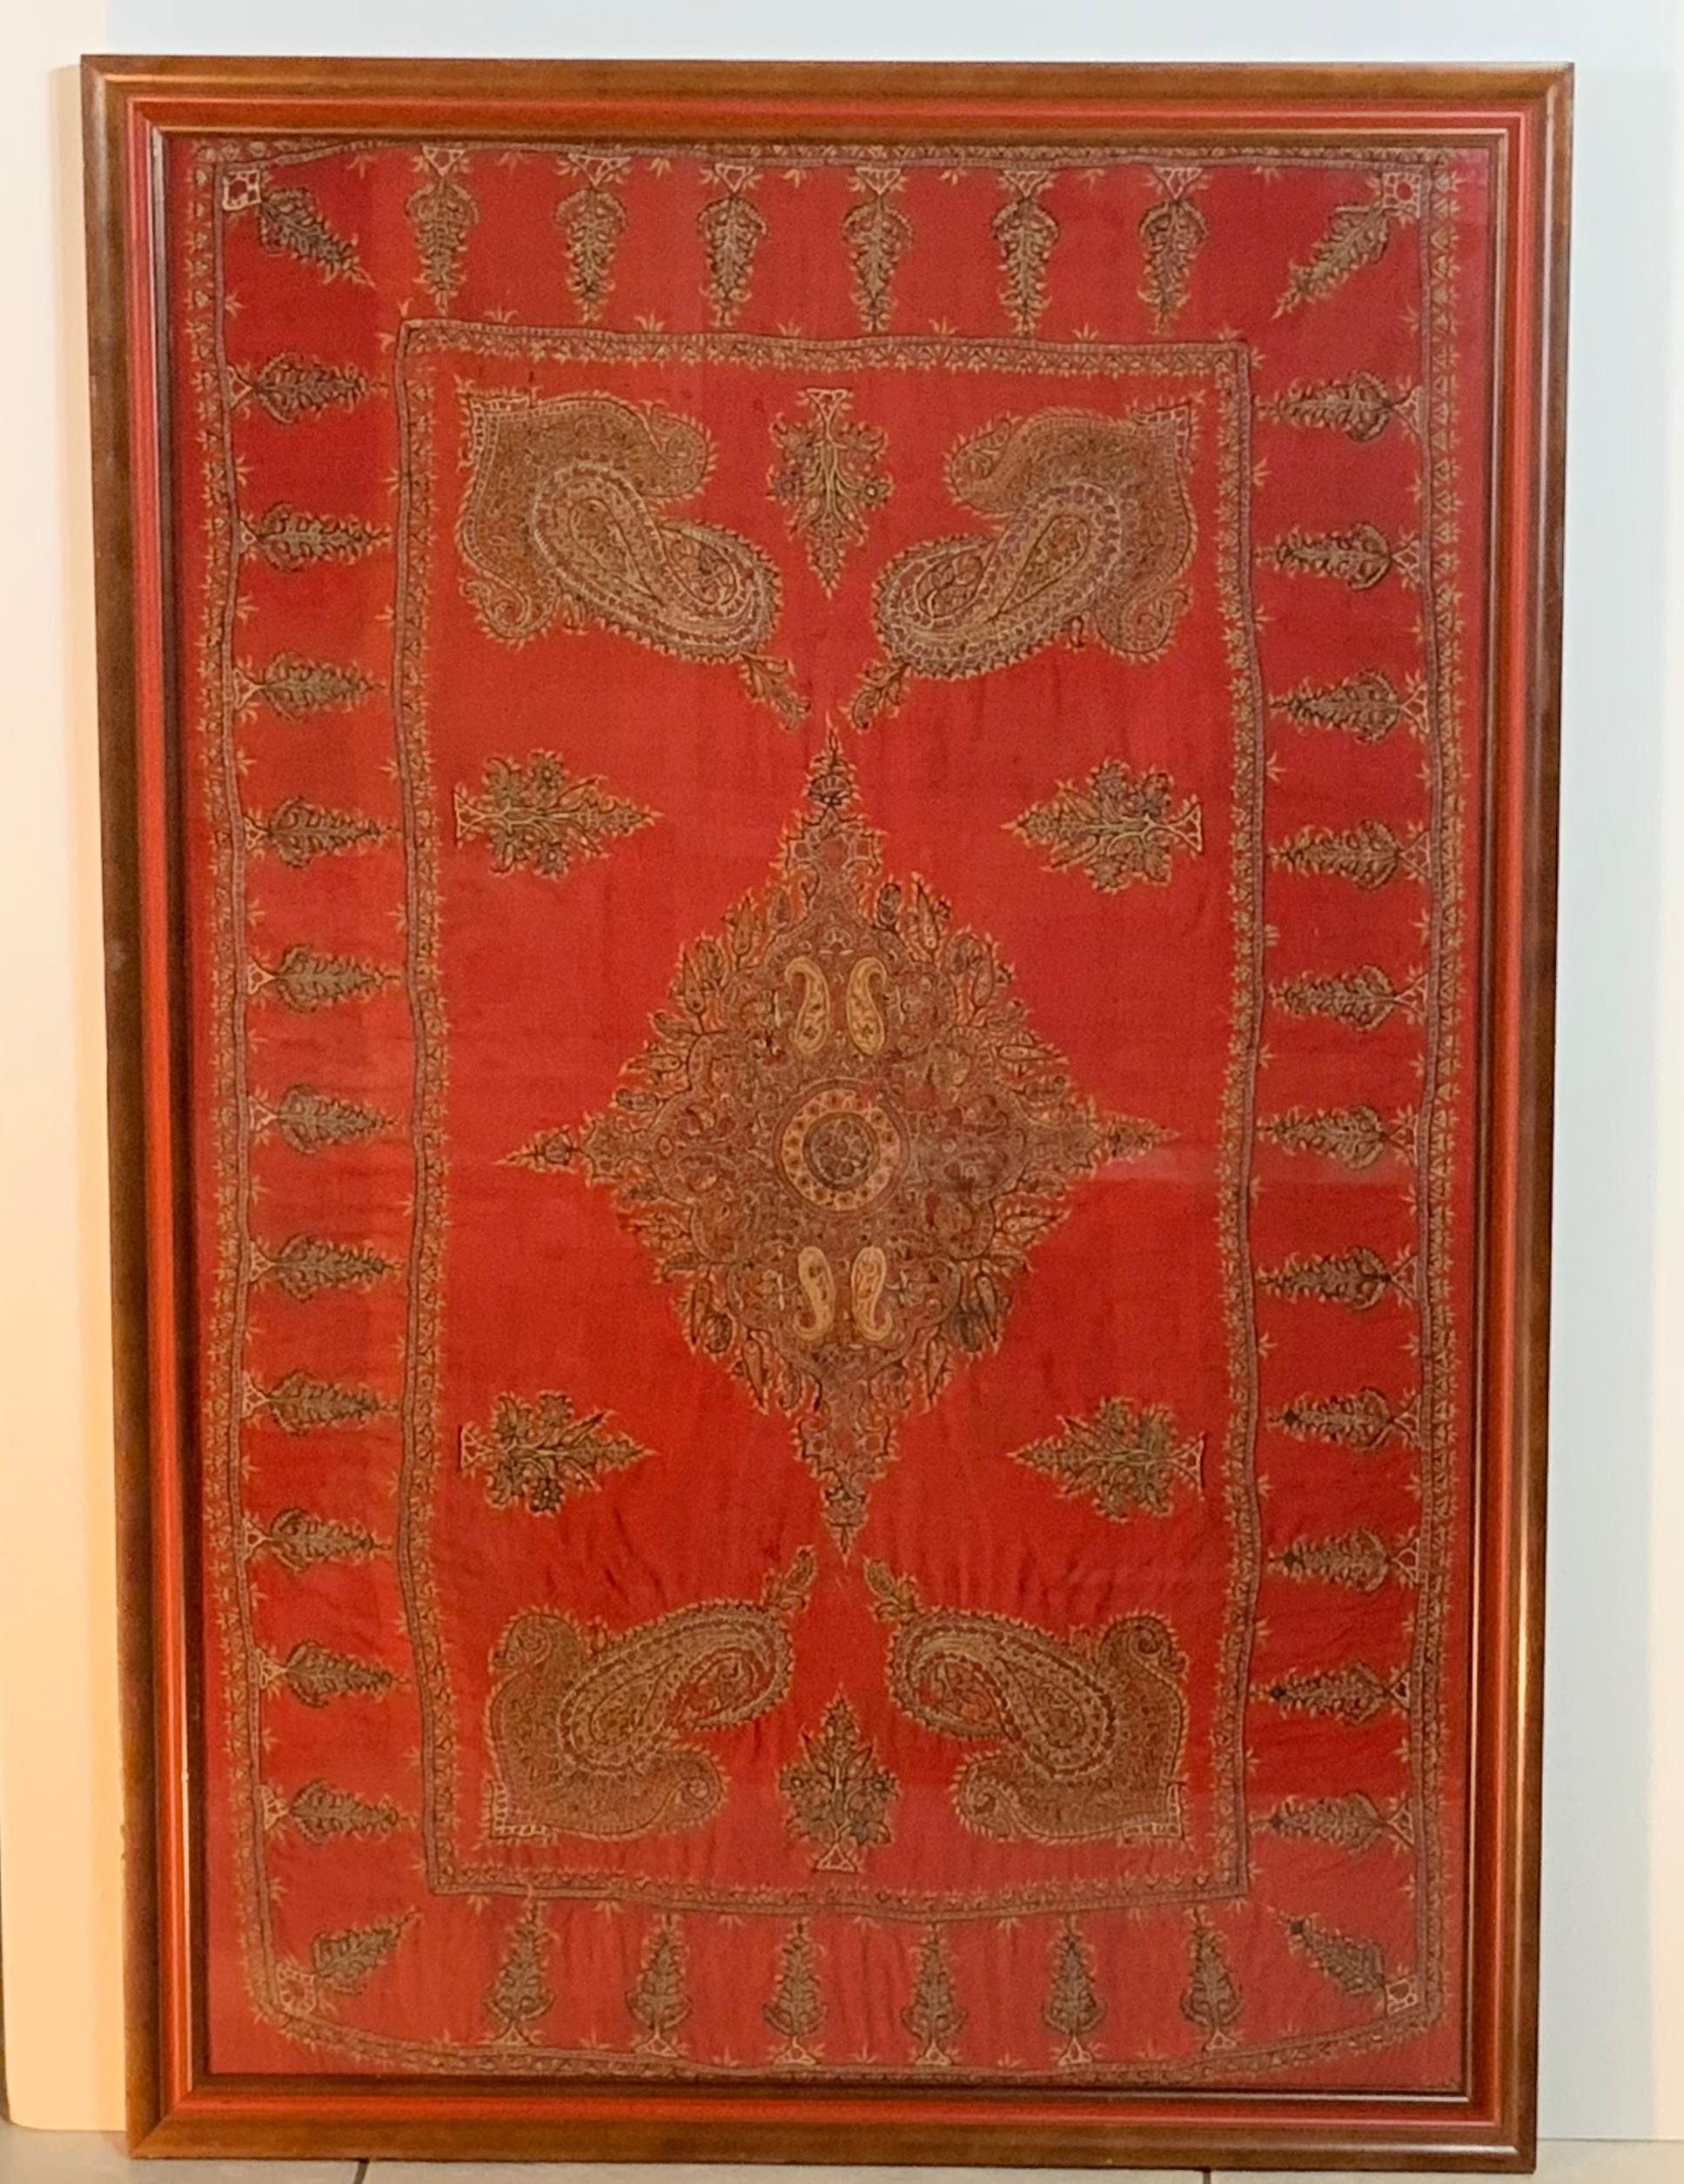 Persian Early 20th Century Hand Embroidery Suzani Wall Hanging